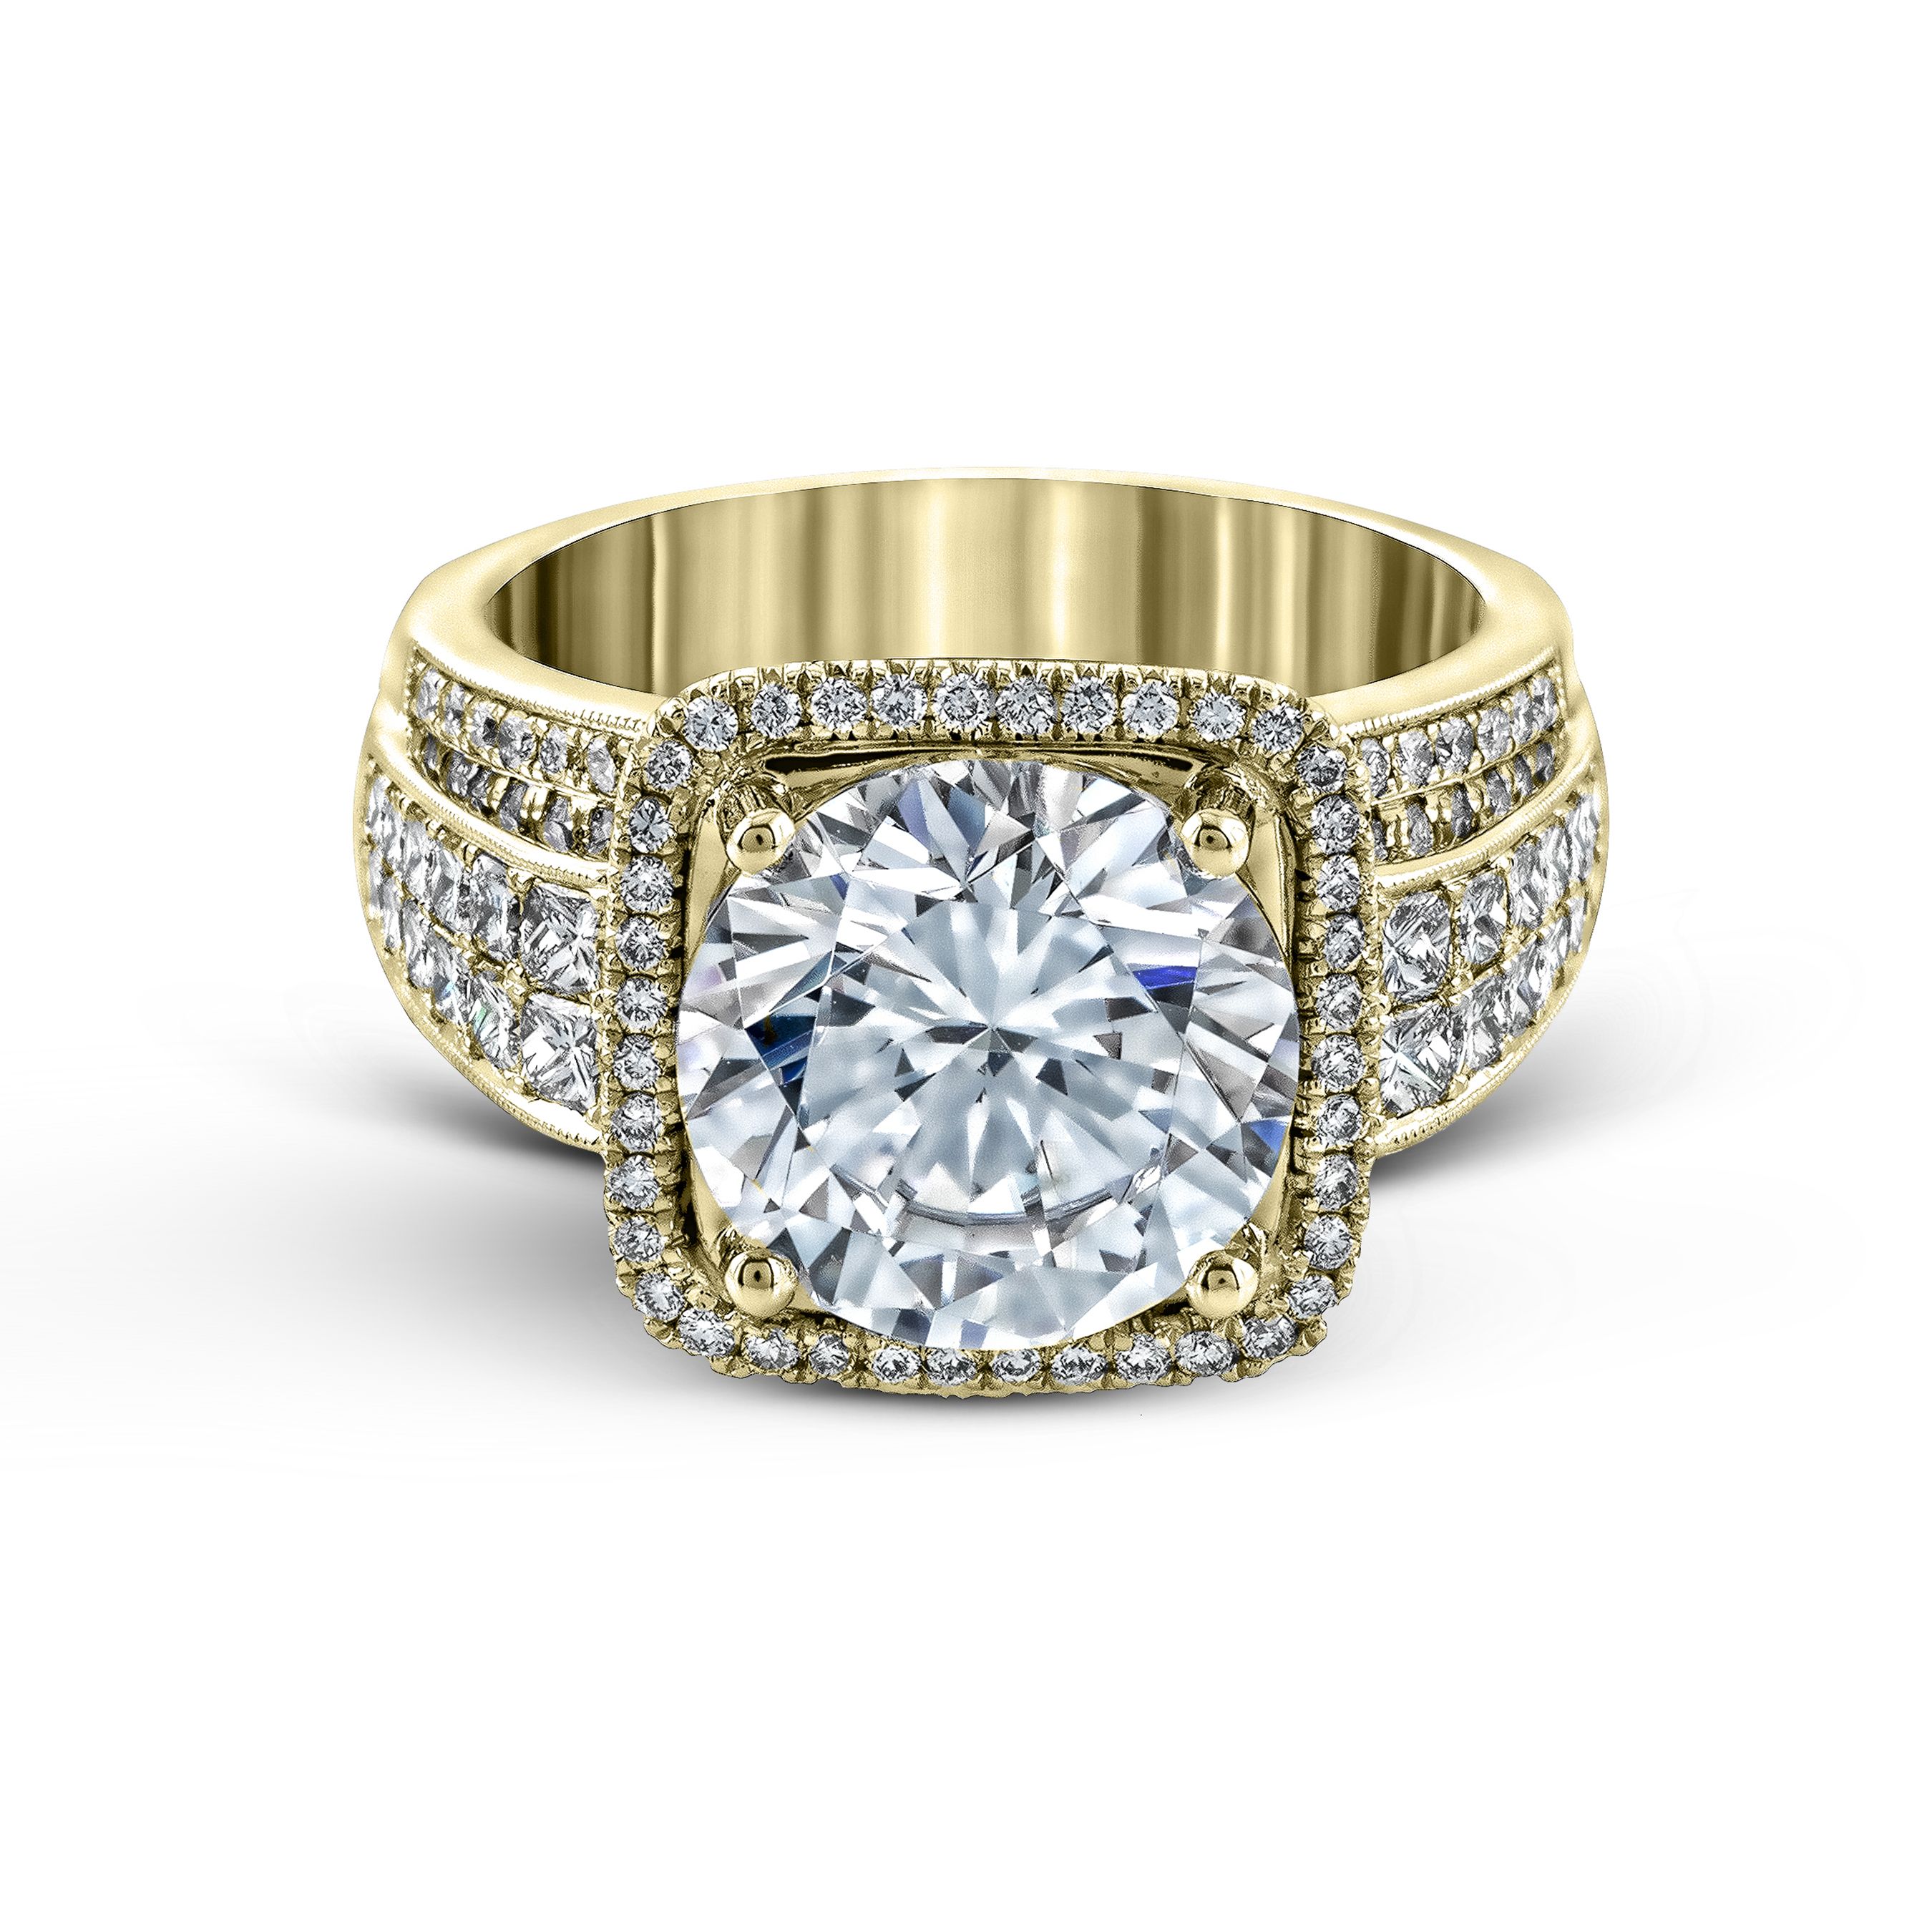 MR2097 Nocturnal Sophistication Collection Yellow Gold Round Cut Engagement Ring